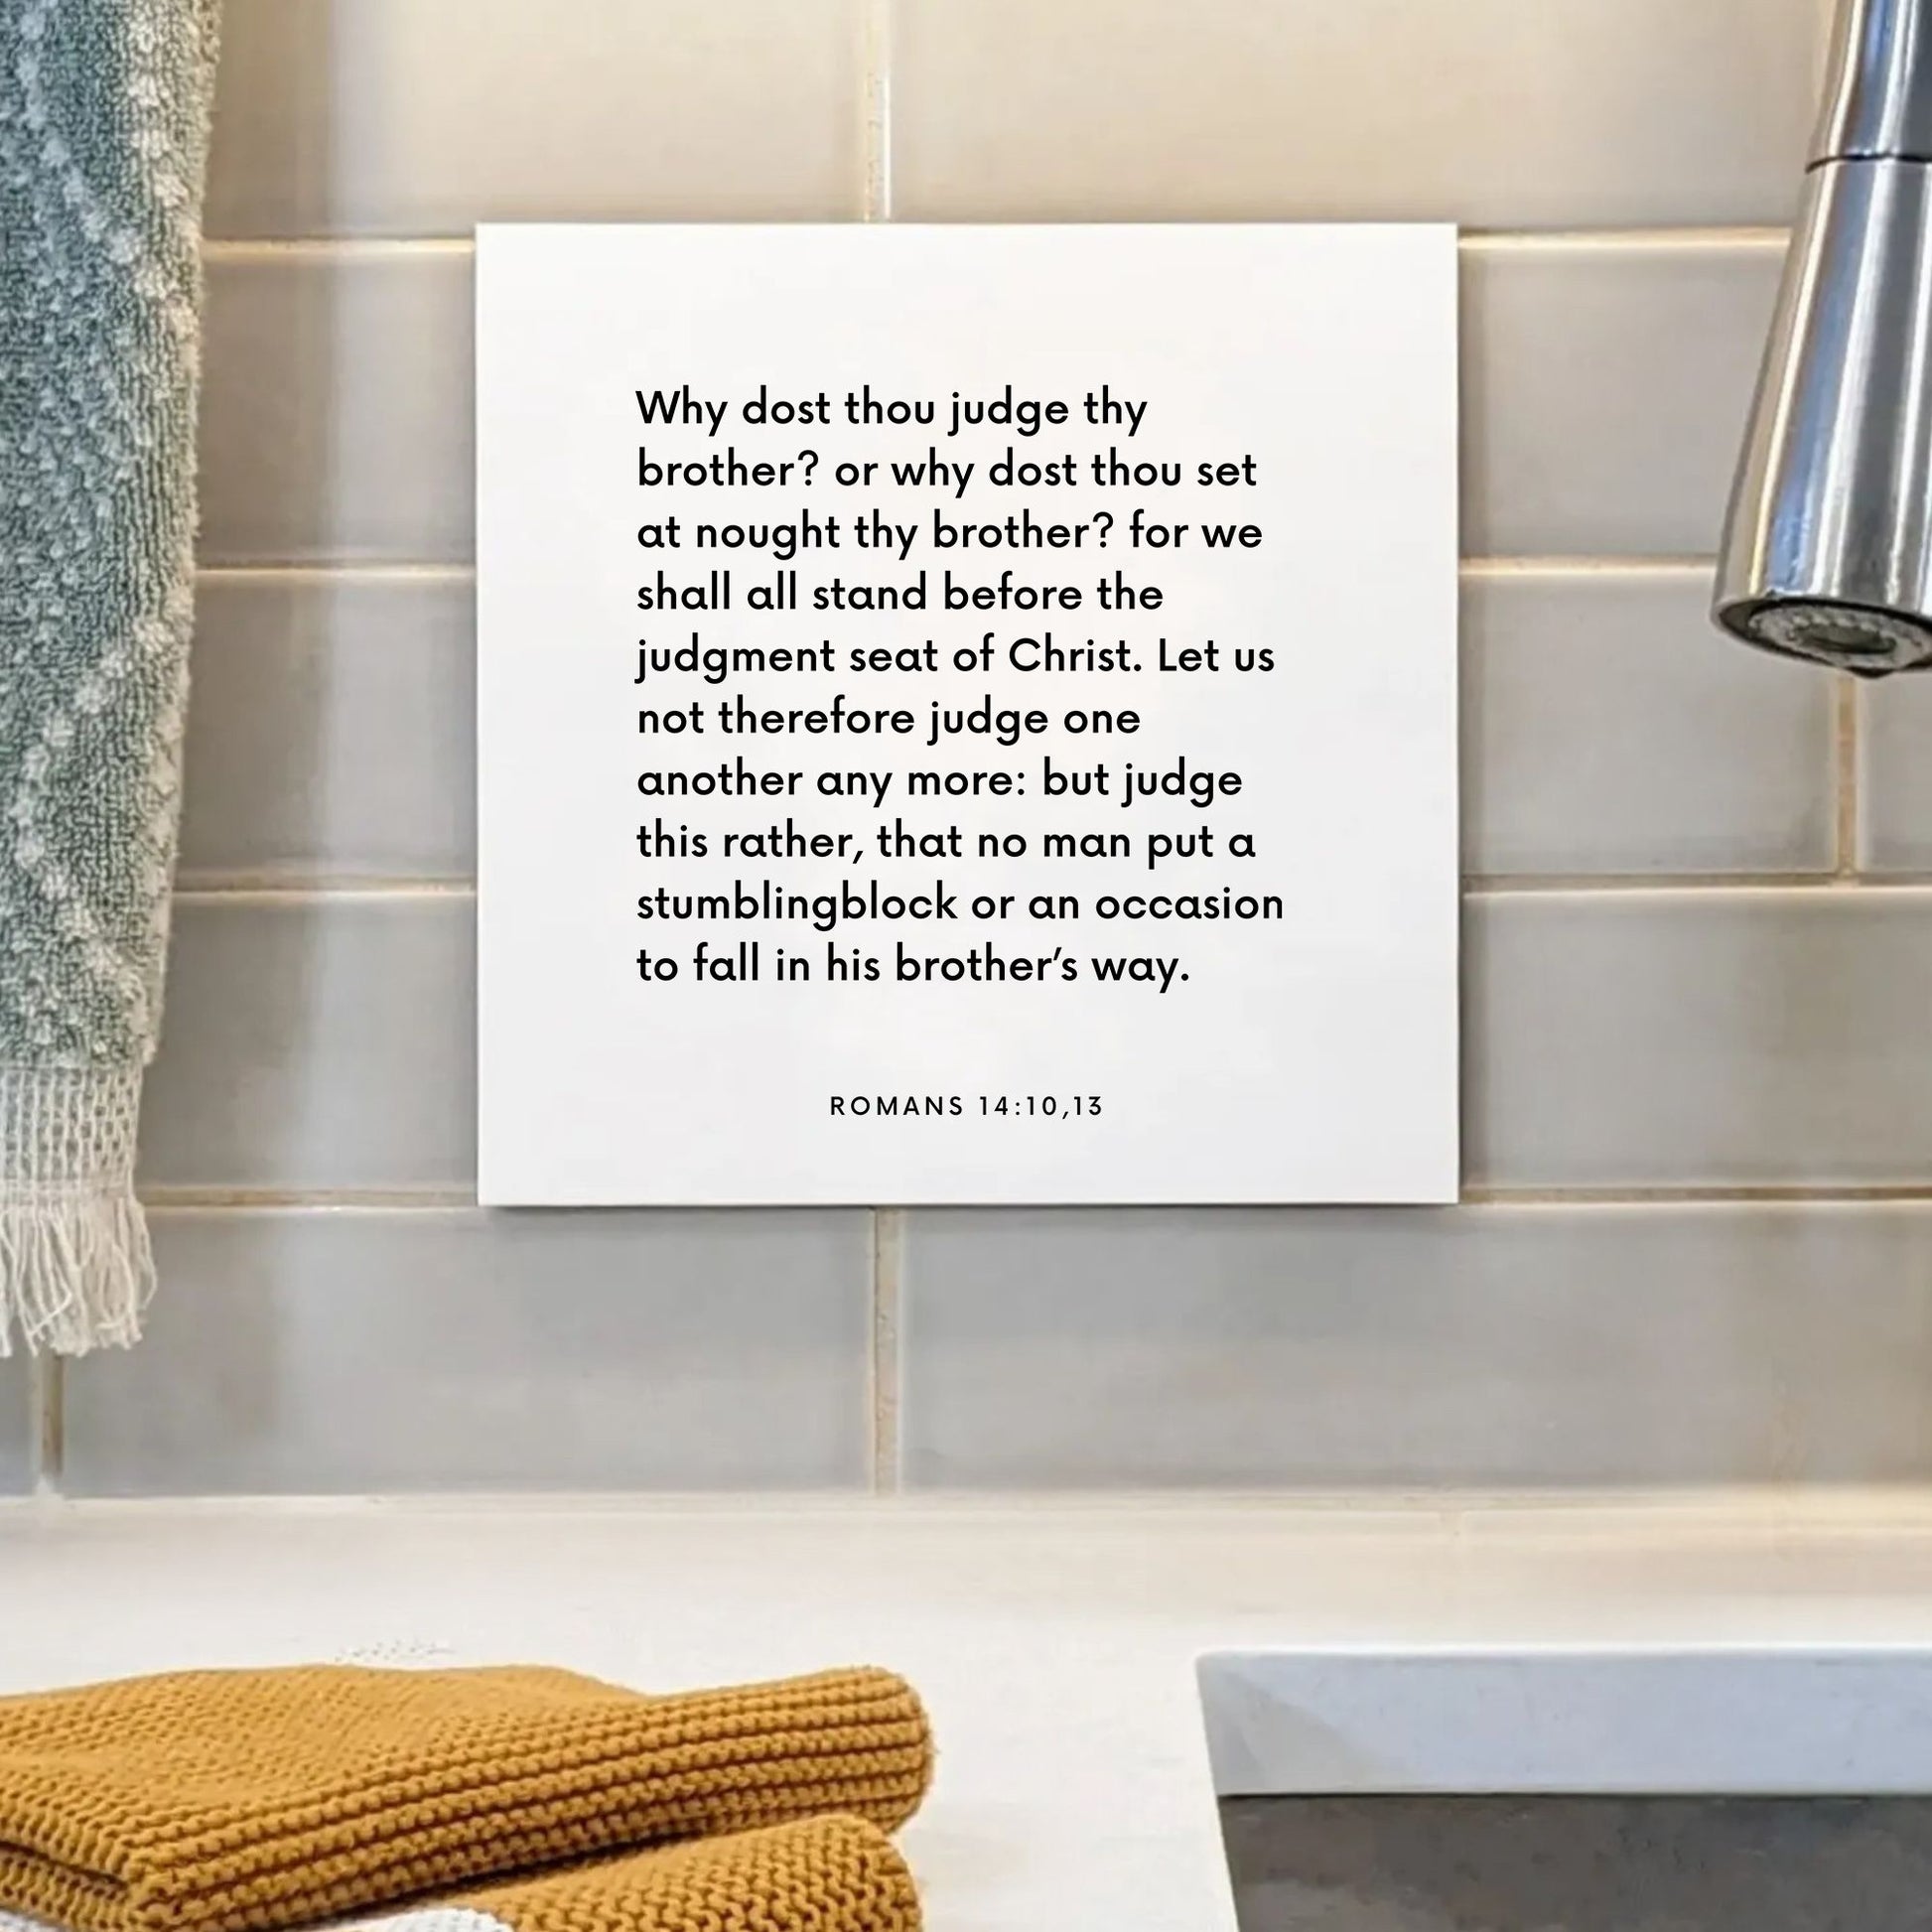 Sink mouting of the scripture tile for Romans 14:10,13 - "Why dost thou judge thy brother?"